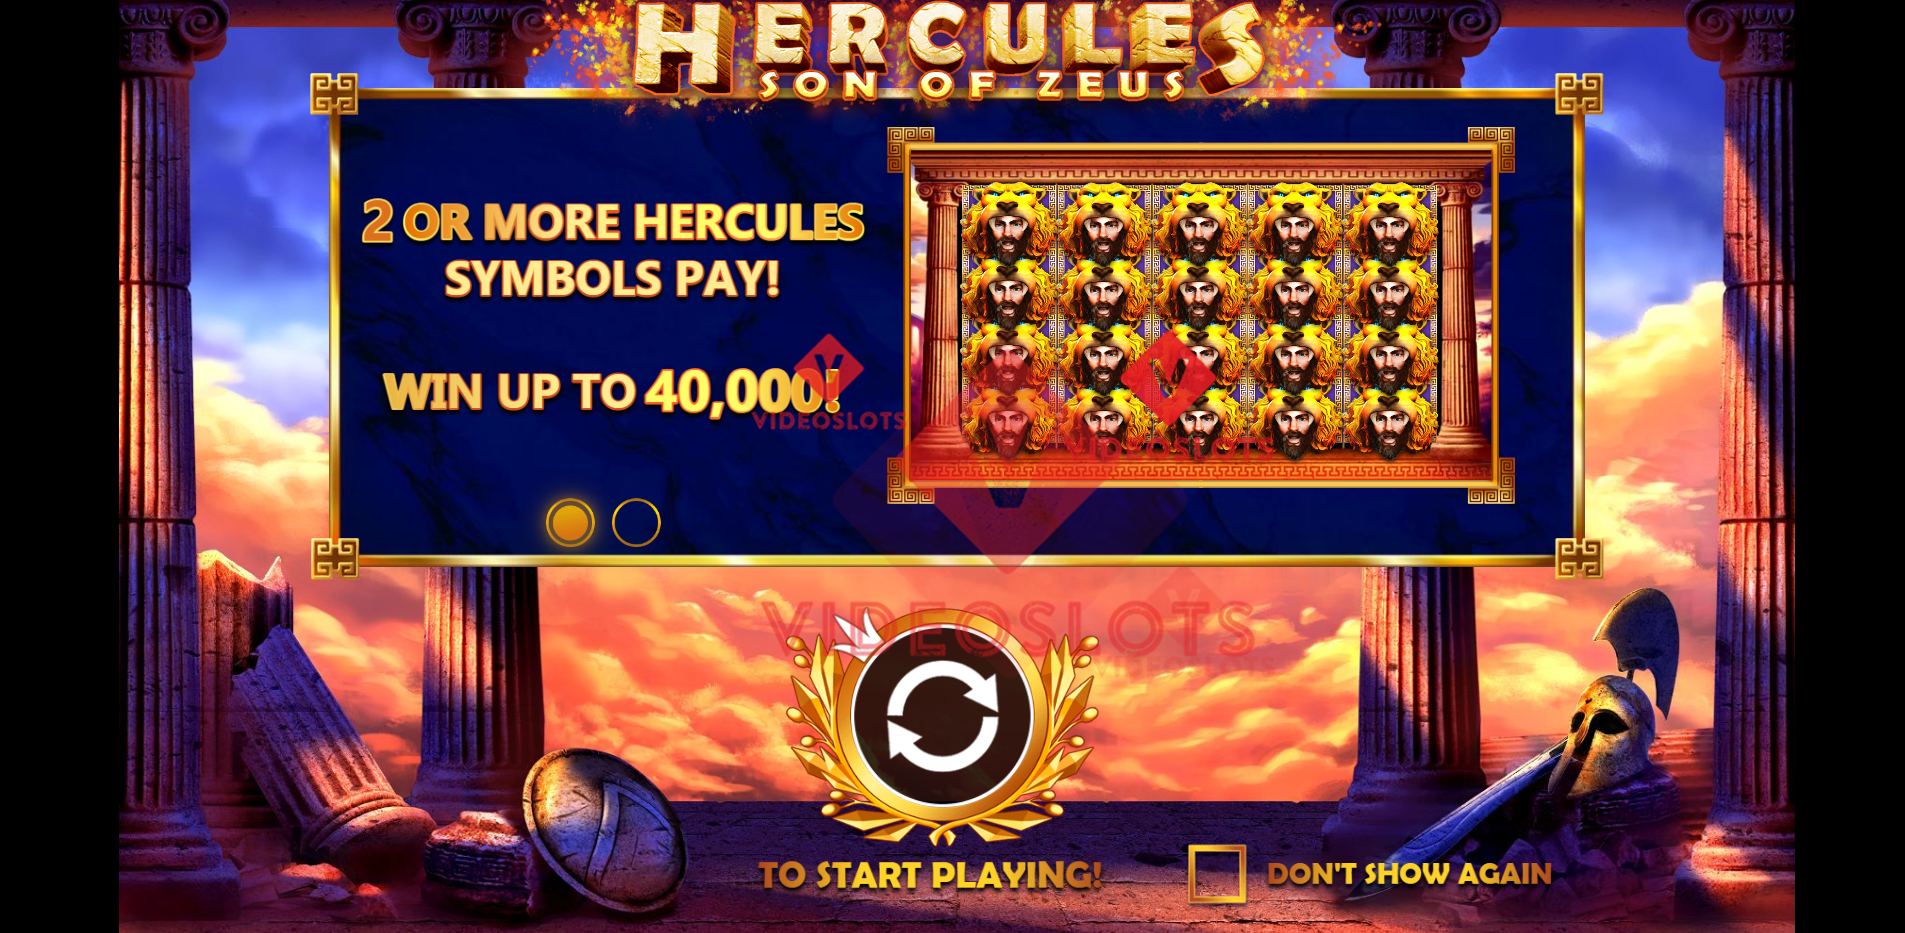 Game Intro for Hercules Son of Zeus slot by Pragmatic Play